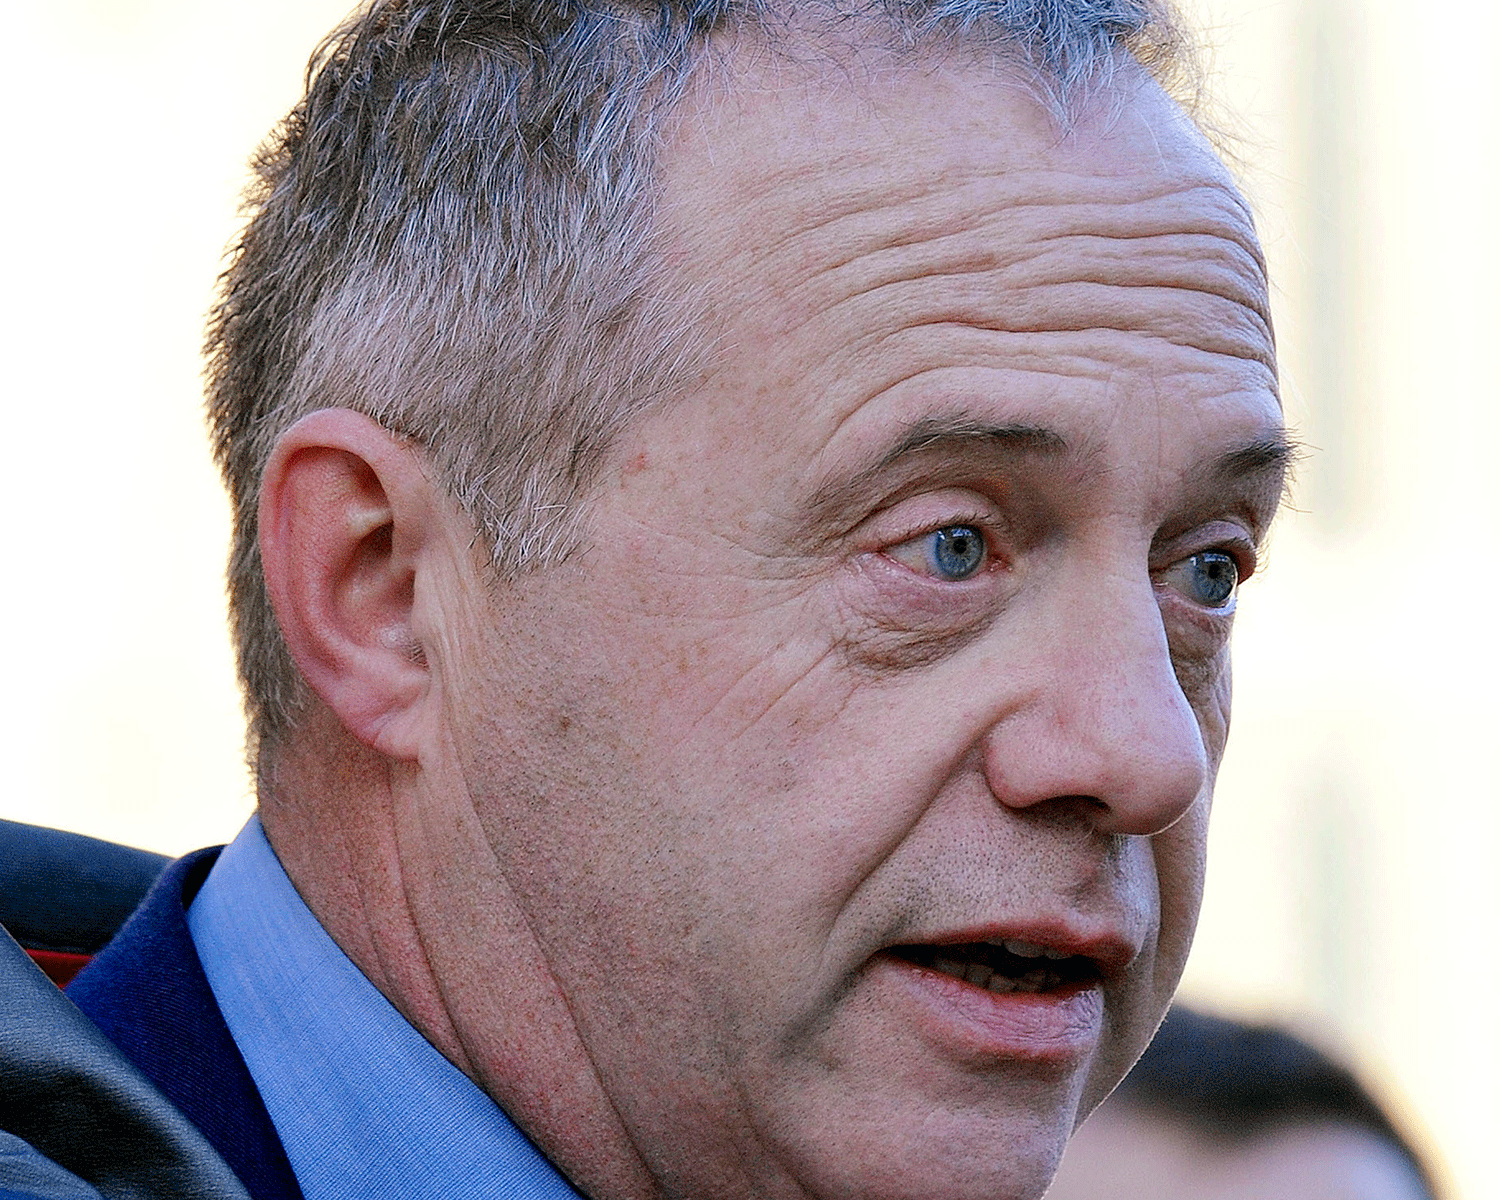 John Mann has said it took "six attempts" by journalists to get the full truth out of David Cameron